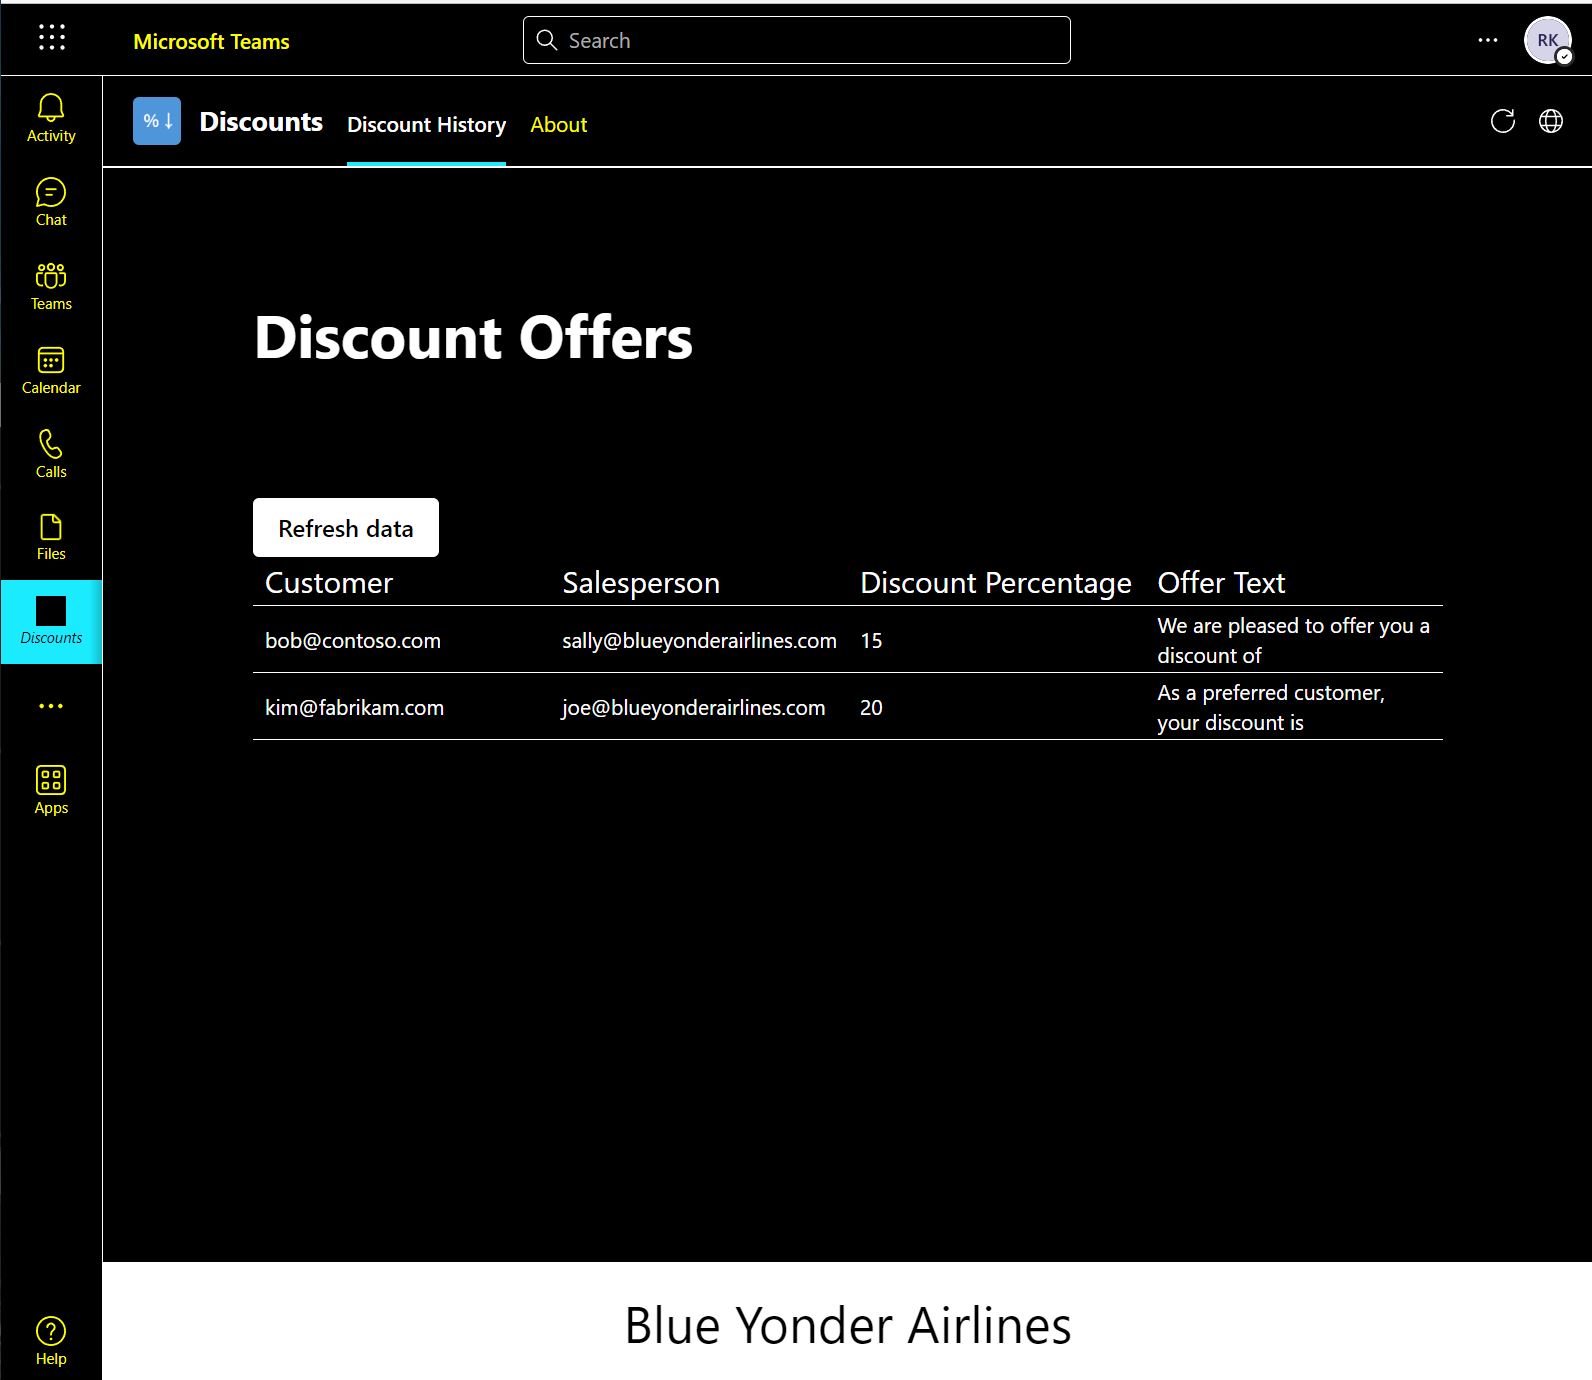 The Discounts app open in Team, formatted with the high contrast Teams theme. It has the app logo and name "Discounts". There are subtabs named "Discount History" and "About". The first of these is open. It has a title "Discount Offers". Below that is a button named "Refresh data". Below that is a grid with columns labelled "Customer", "Salesperson", "Discount Percentage", and "Offer Text". There are two data rows in the grid with fictional email addresses for customer and salesperson. The top row has 15 in the "Discount Percentage" column and "We are pleased to offer you a discount of" in the "Offer Text" column. The second row has 20 in the "Discount Percentage" column and "As a perferred customer, your discount is" in the "Offer Text" column. At the bottom of the tab is a footer bar containing the name "Blue Yonder Airlines".